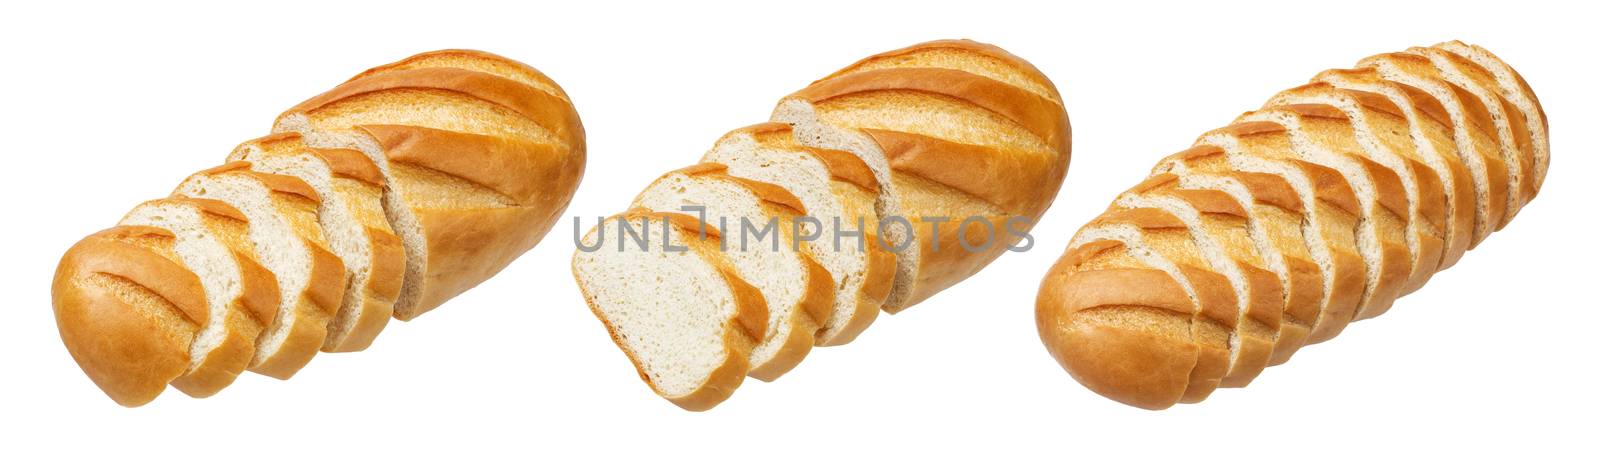 Pieces of long loaf. Sliced white bread isolated on white background with clipping path